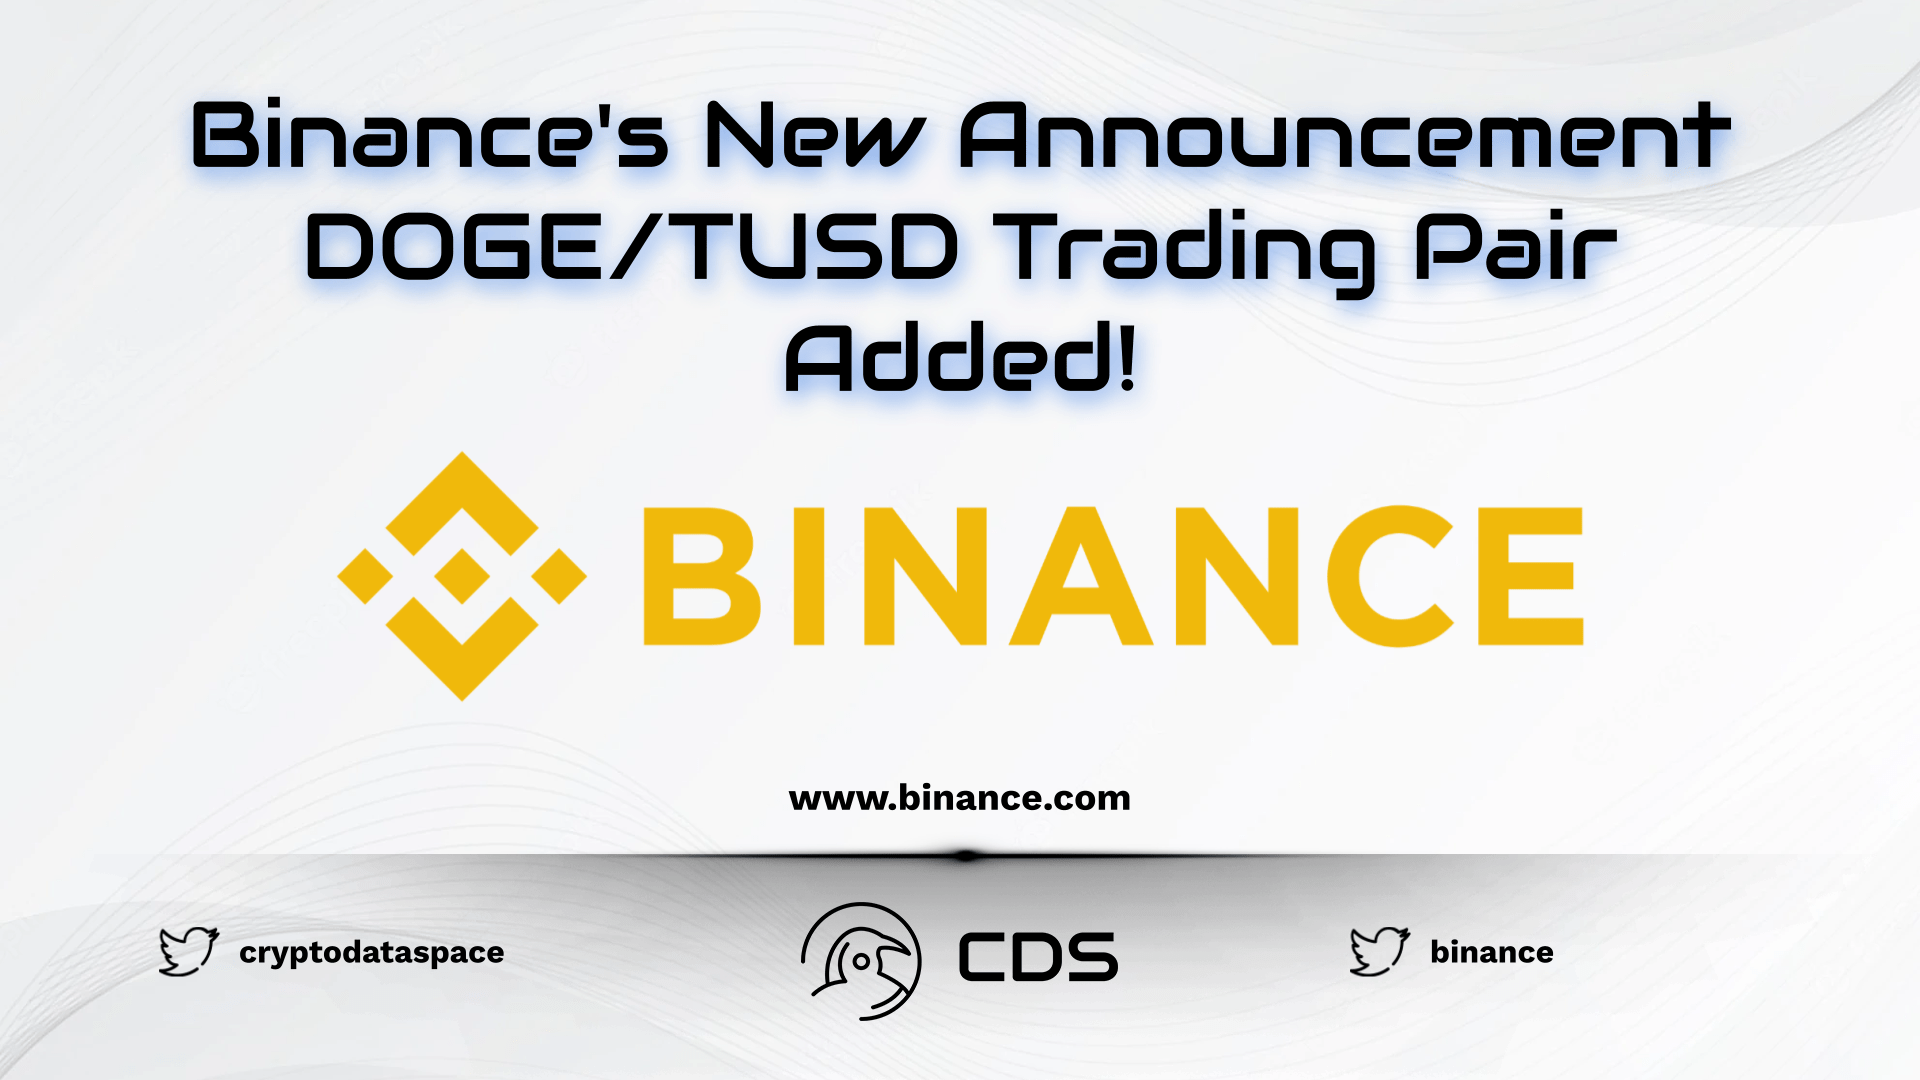 Binance's New Announcement DOGETUSD Trading Pair Added!